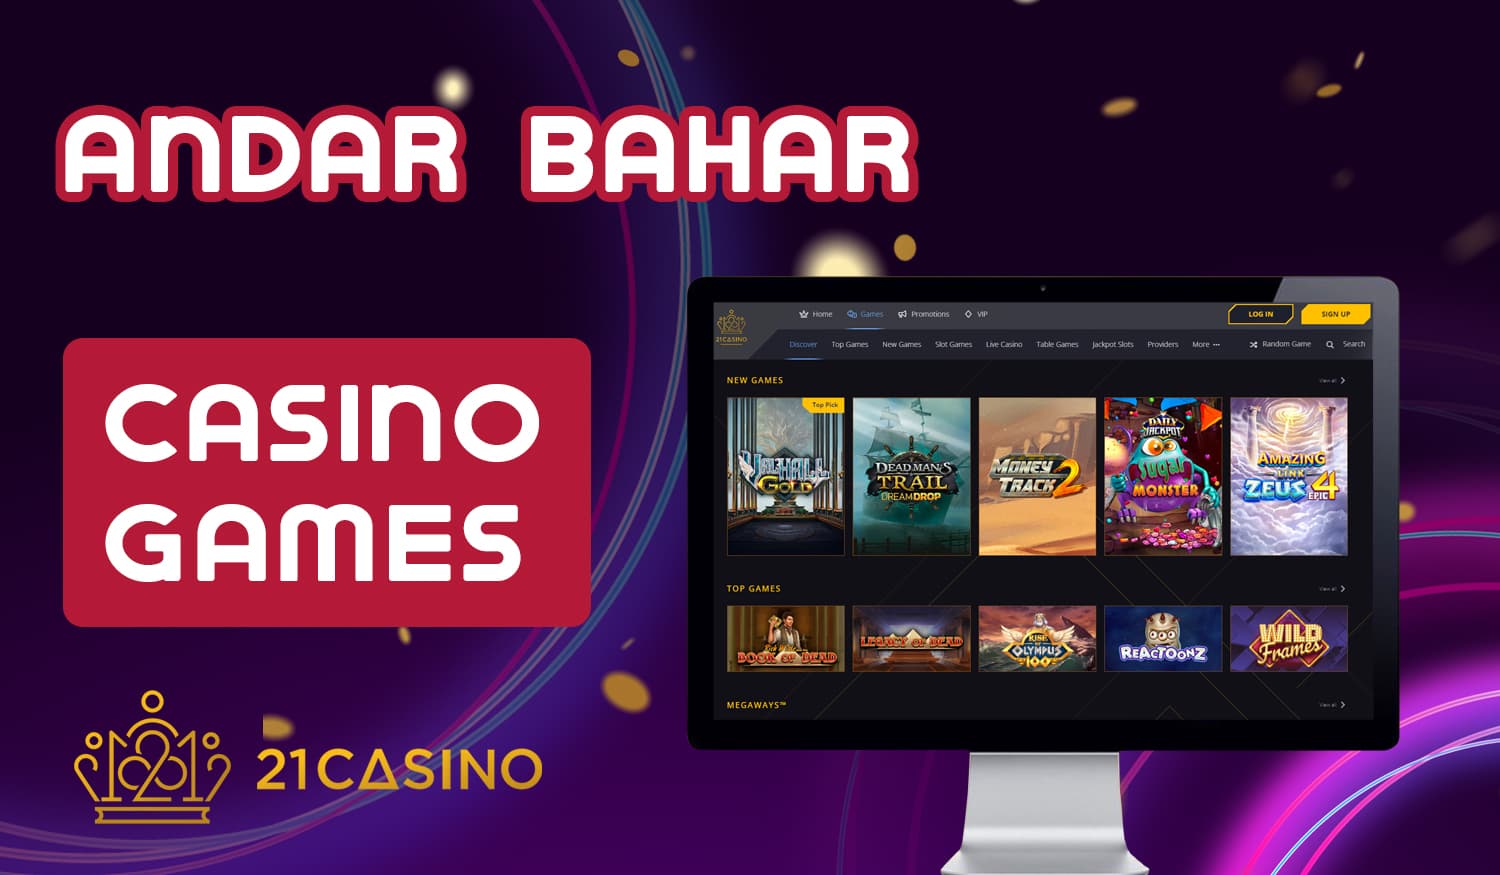 What games are available in the online casino section of 21 Casino for Indian users